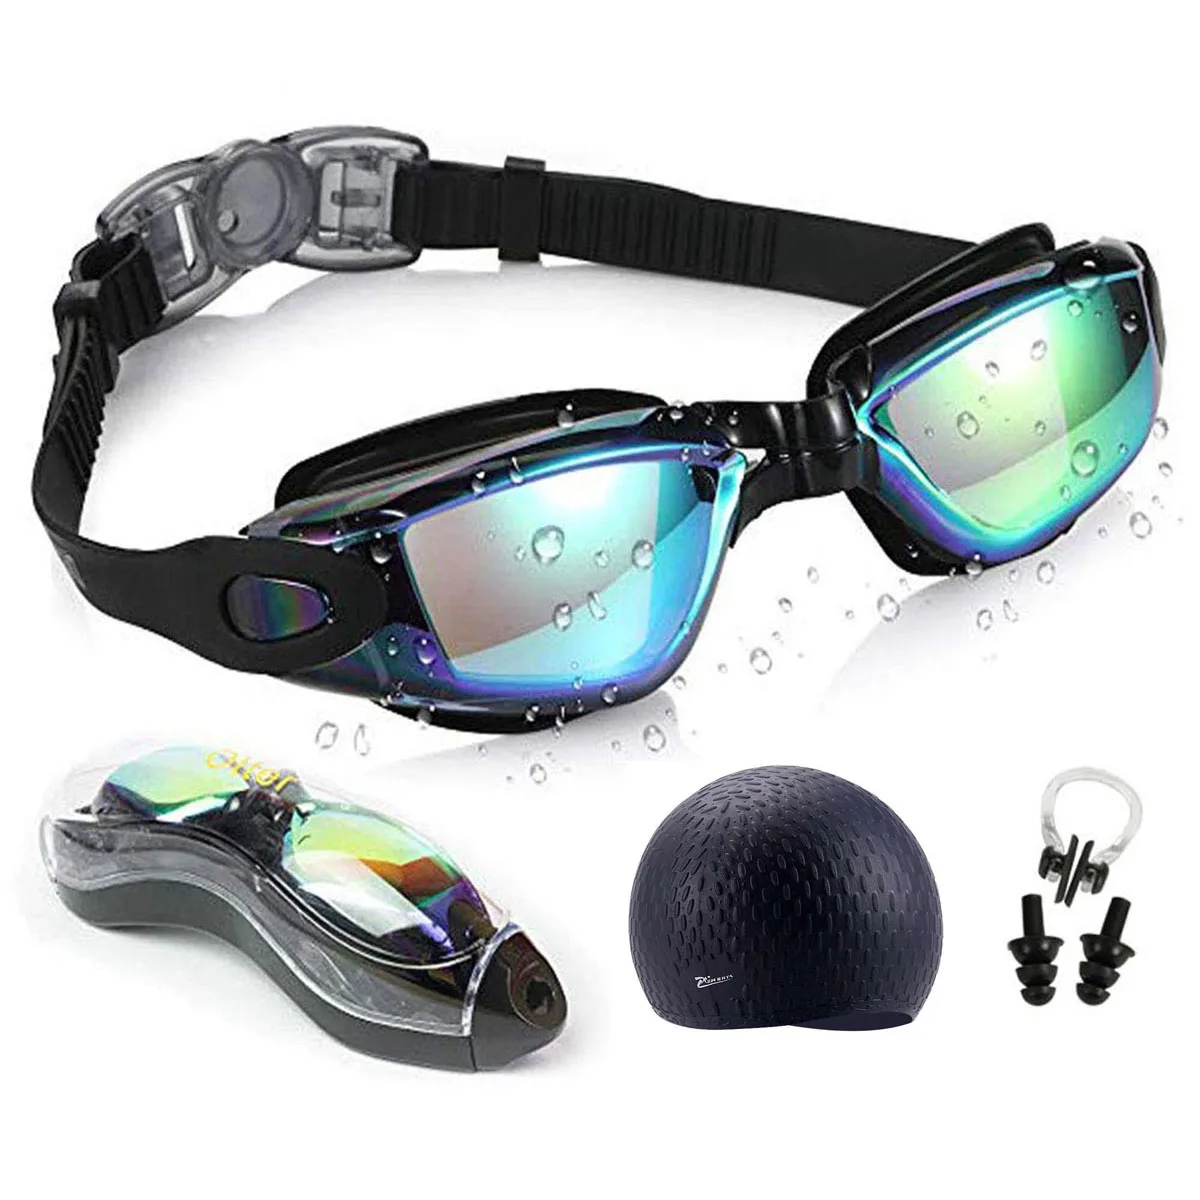 Men Swimming Glasses Anti fog UV Silicone Waterproof Swim Caps Long Hair Eyewear Swim Goggles Case Nose Earplug Diving Equipment ipl 190nm 14000nm eye protective glasses metal laser cosmetolog safety goggles od7 for laser hair removal pack of 3